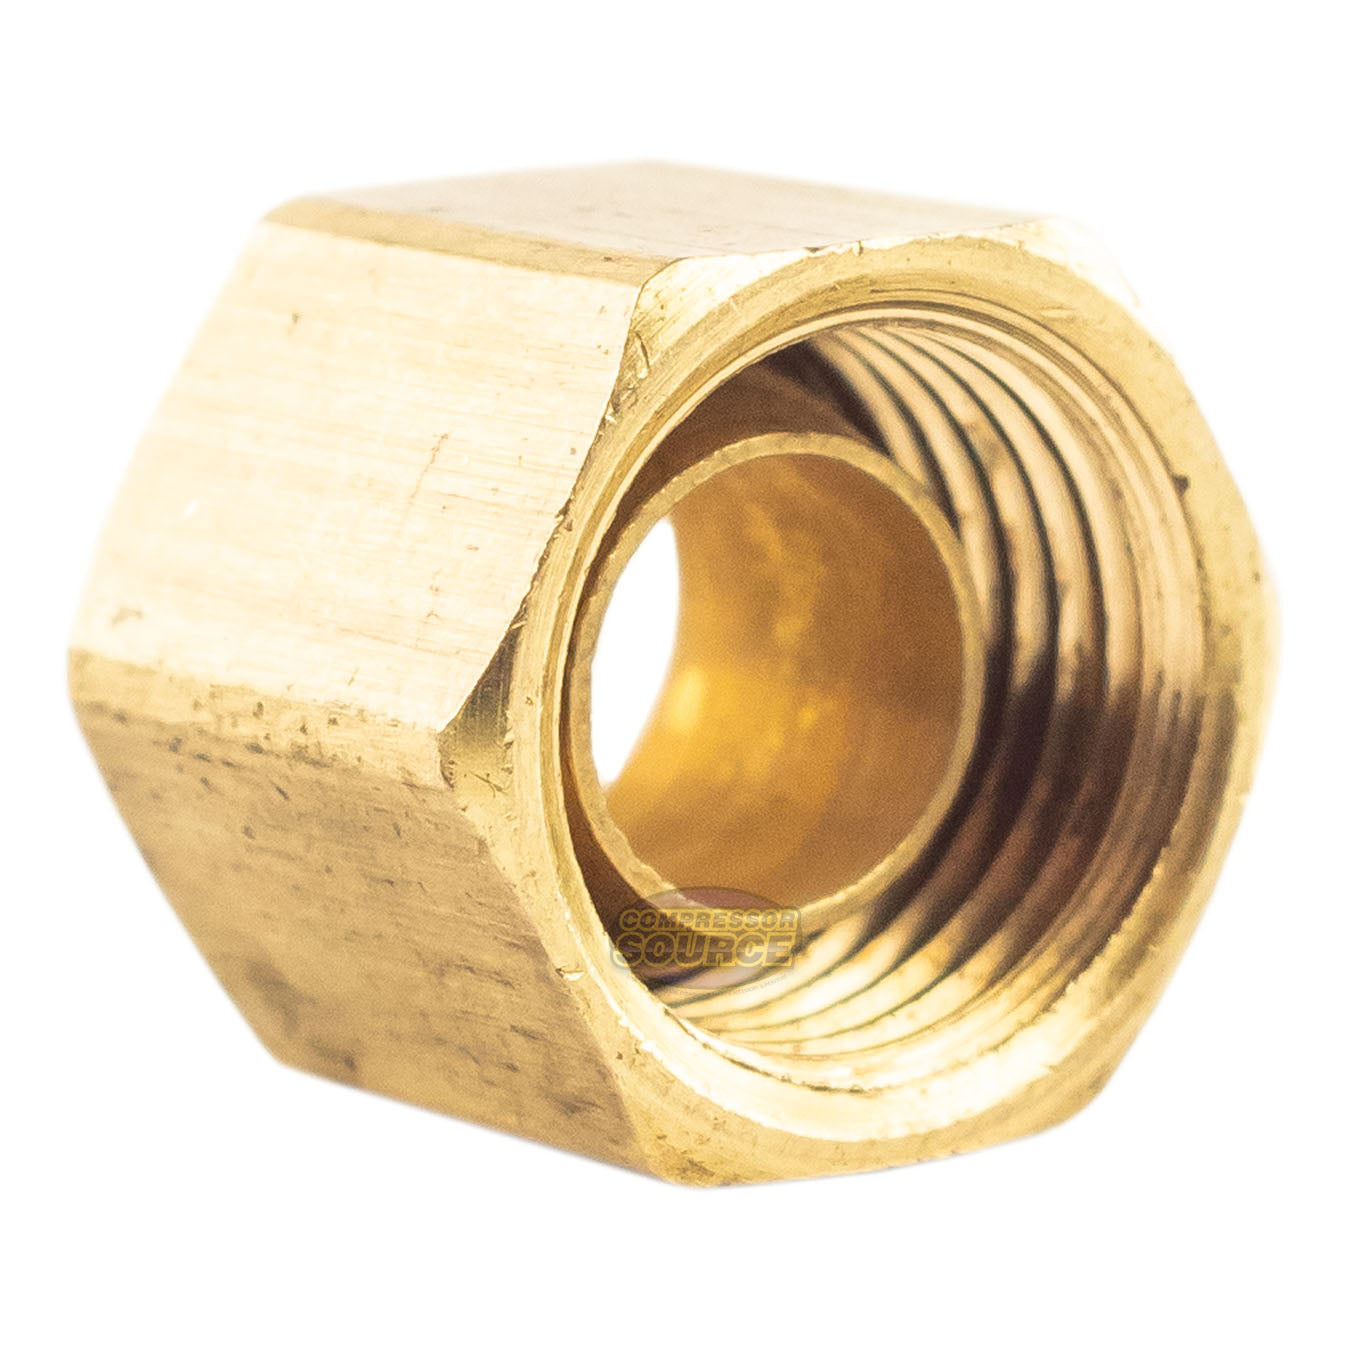 Ltwfitting Special Offer 1/4OD Brass Compression Insert, Sleeve Ferrule Nut  (Pack of 125) : : DIY & Tools